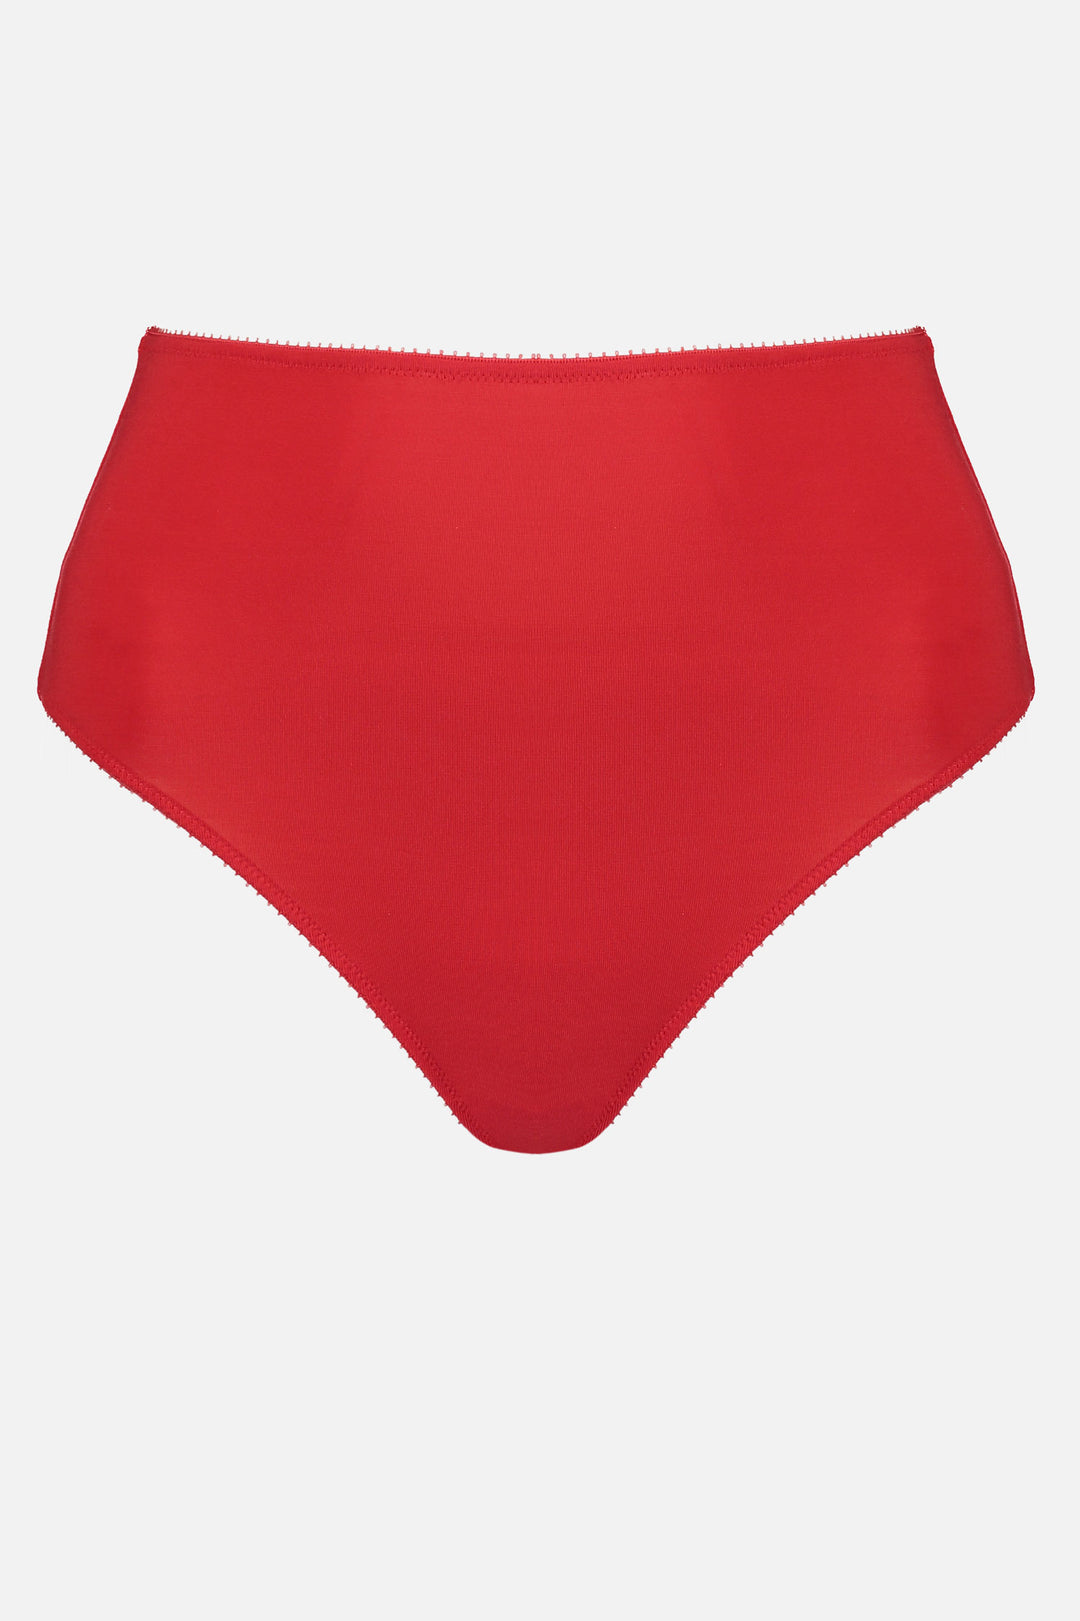 Videris Lingerie high waist knicker in red TENCEL™ cut to follow the natural curve of your hips